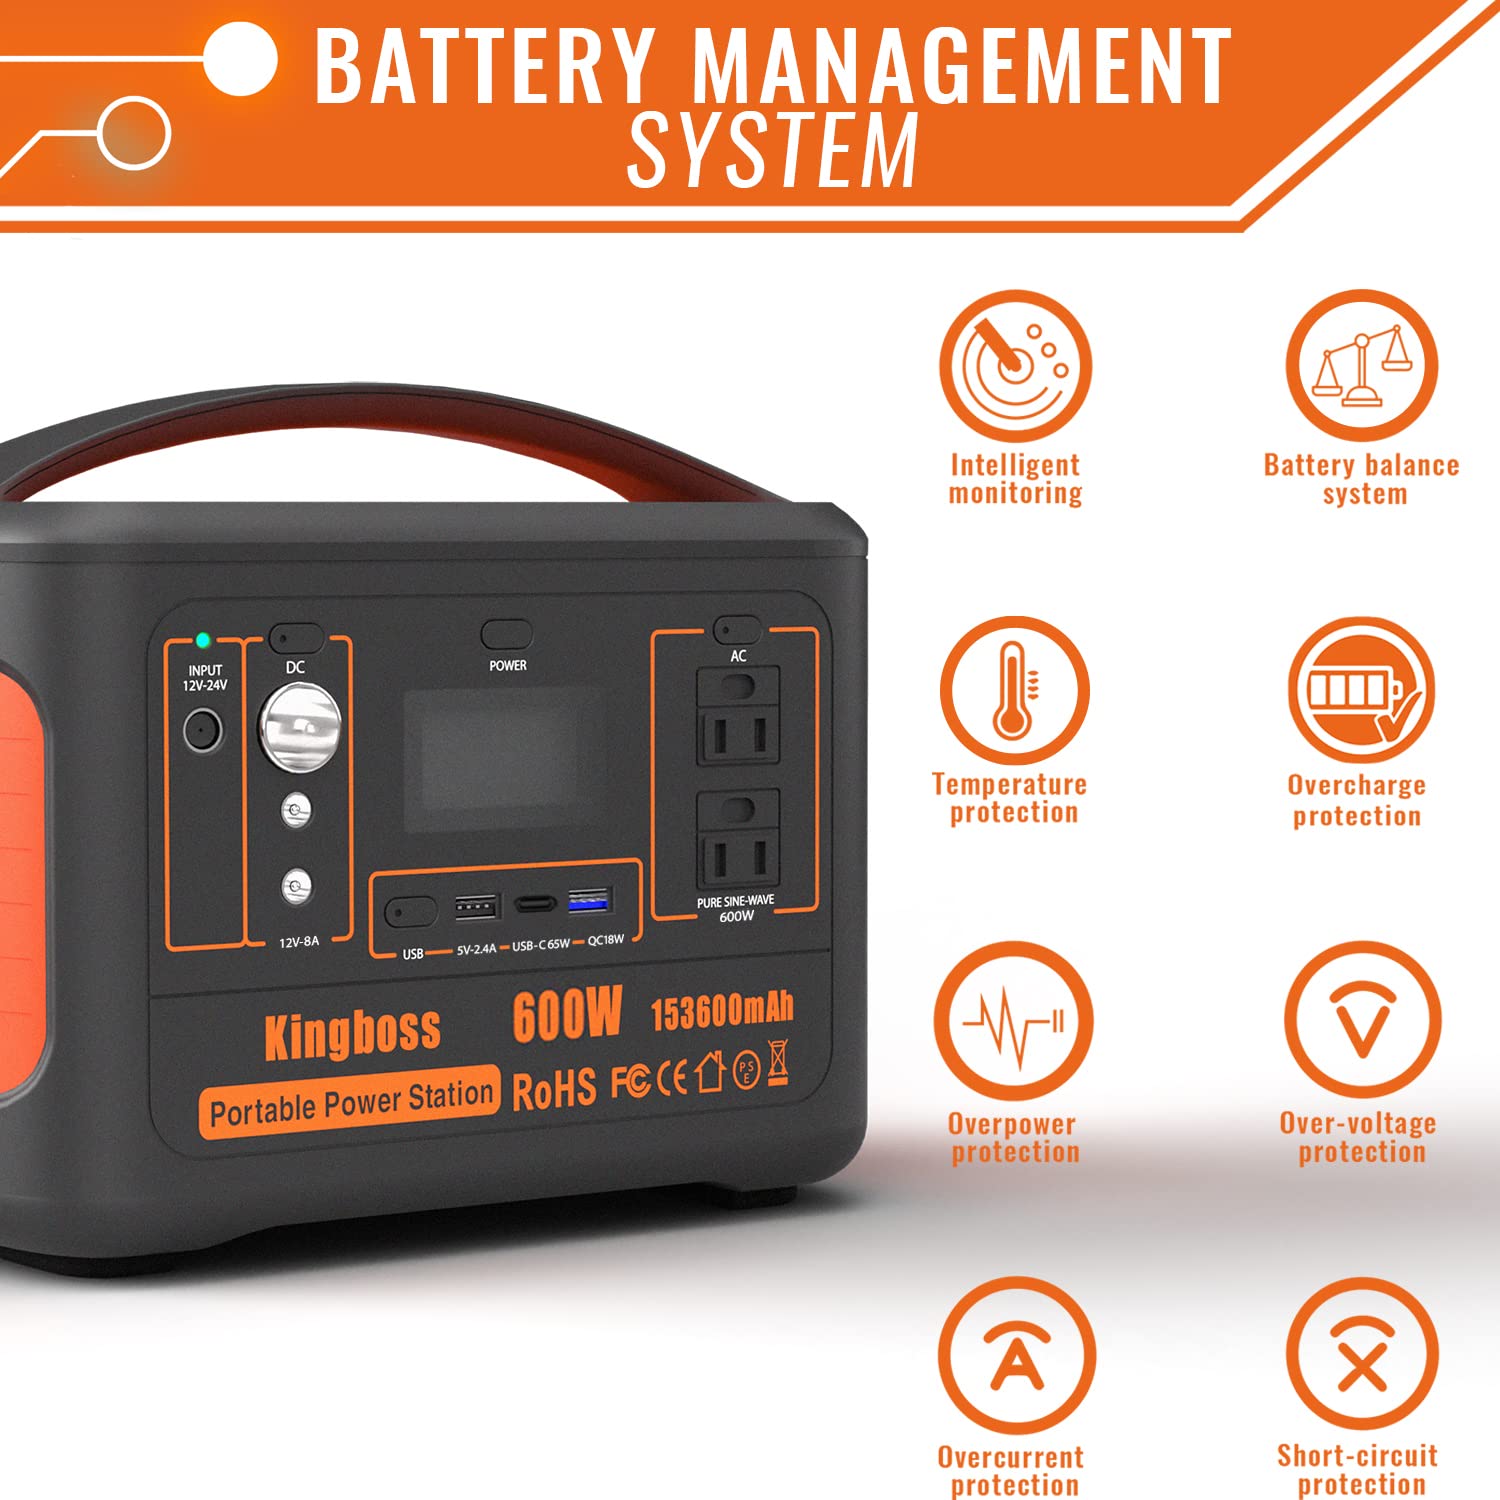 Portable Generator, Power Station 600W (Peak 1200W) Kingboss, 153600mAh 568WH, Lithium Battery 110V/600W, AC Outlet, 2*DC Carport, 2*USB-C, QC USB 3.0, Camping Power bank, Outdoor Indoor, RV, Outage